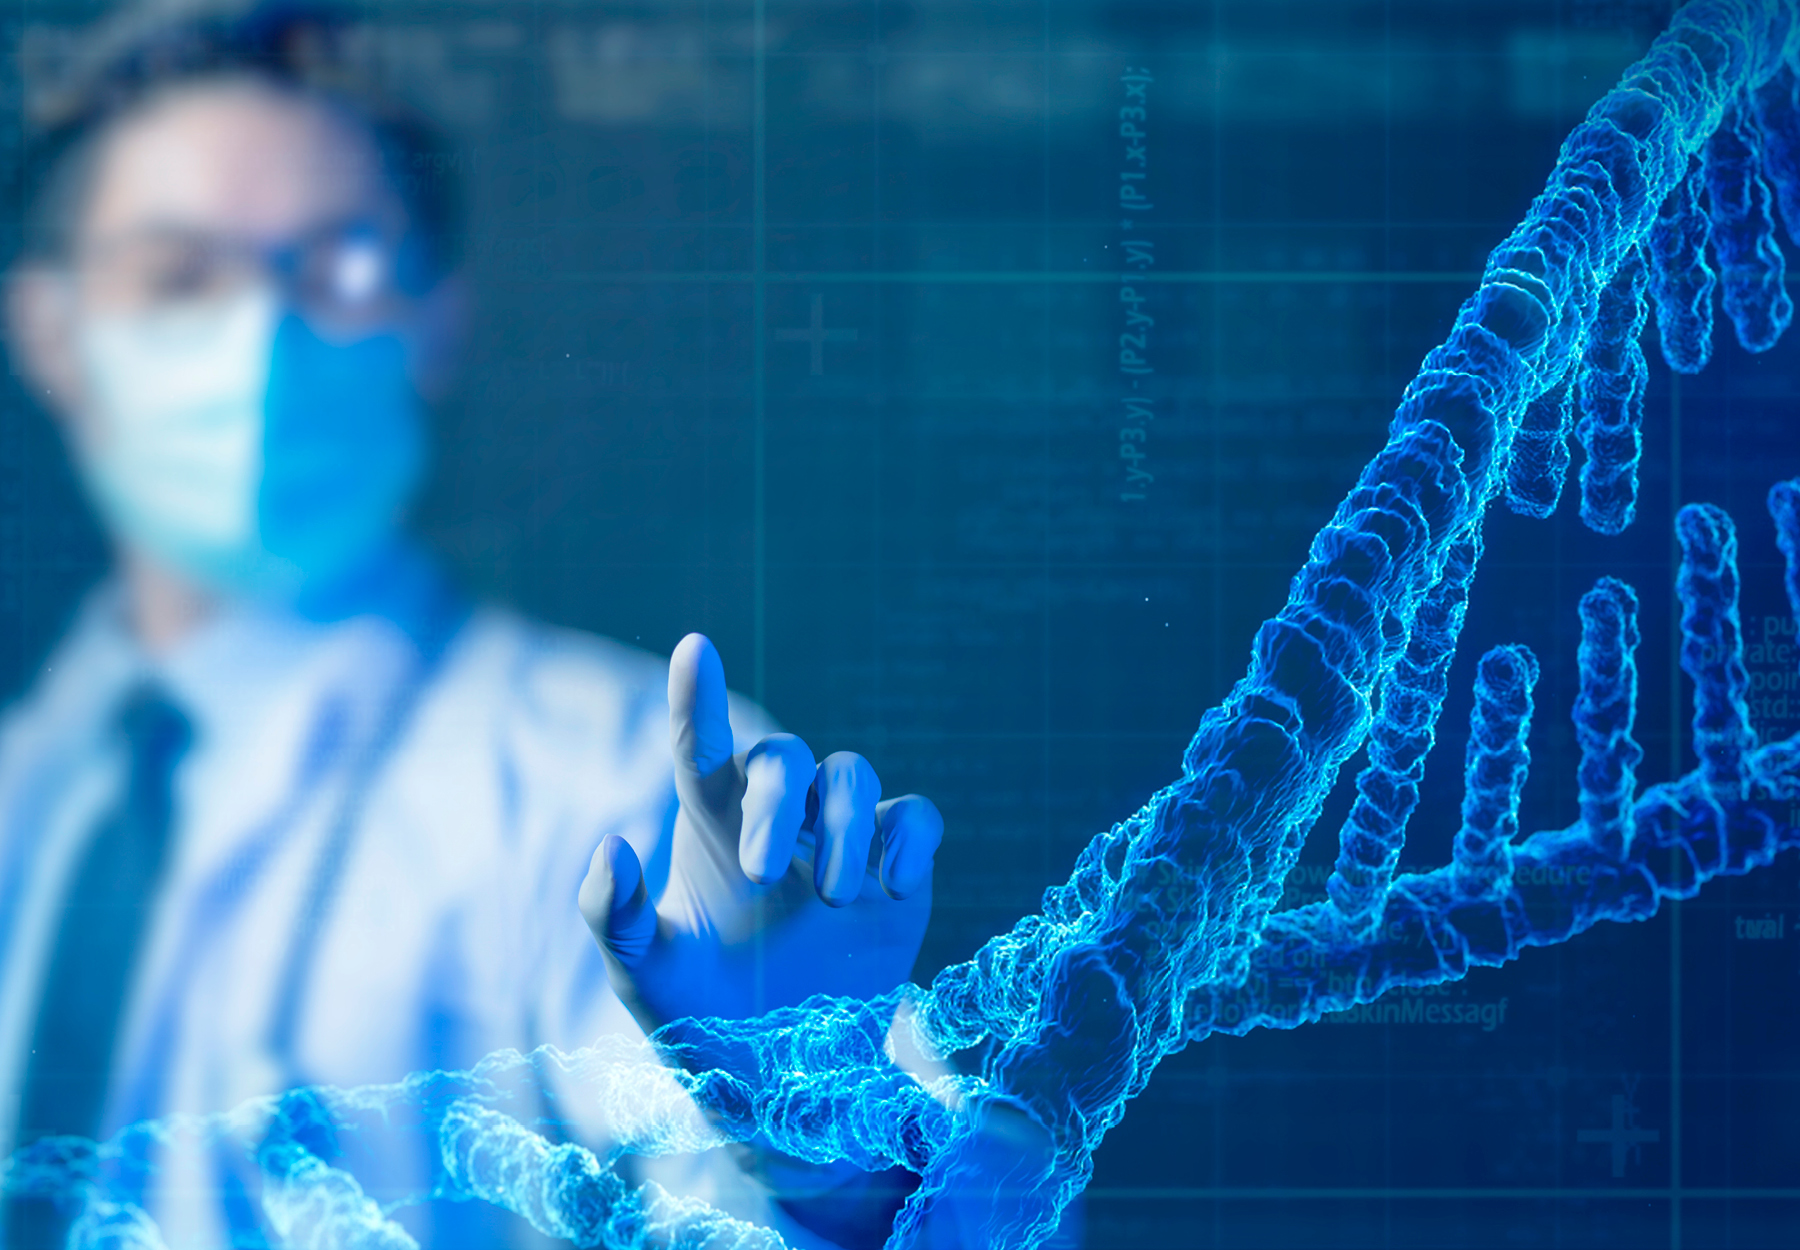 Photo illustration of laboratory professional in full PPE pointing to blue graphical display of DNA strand. Genetic testing concept. iStock image.